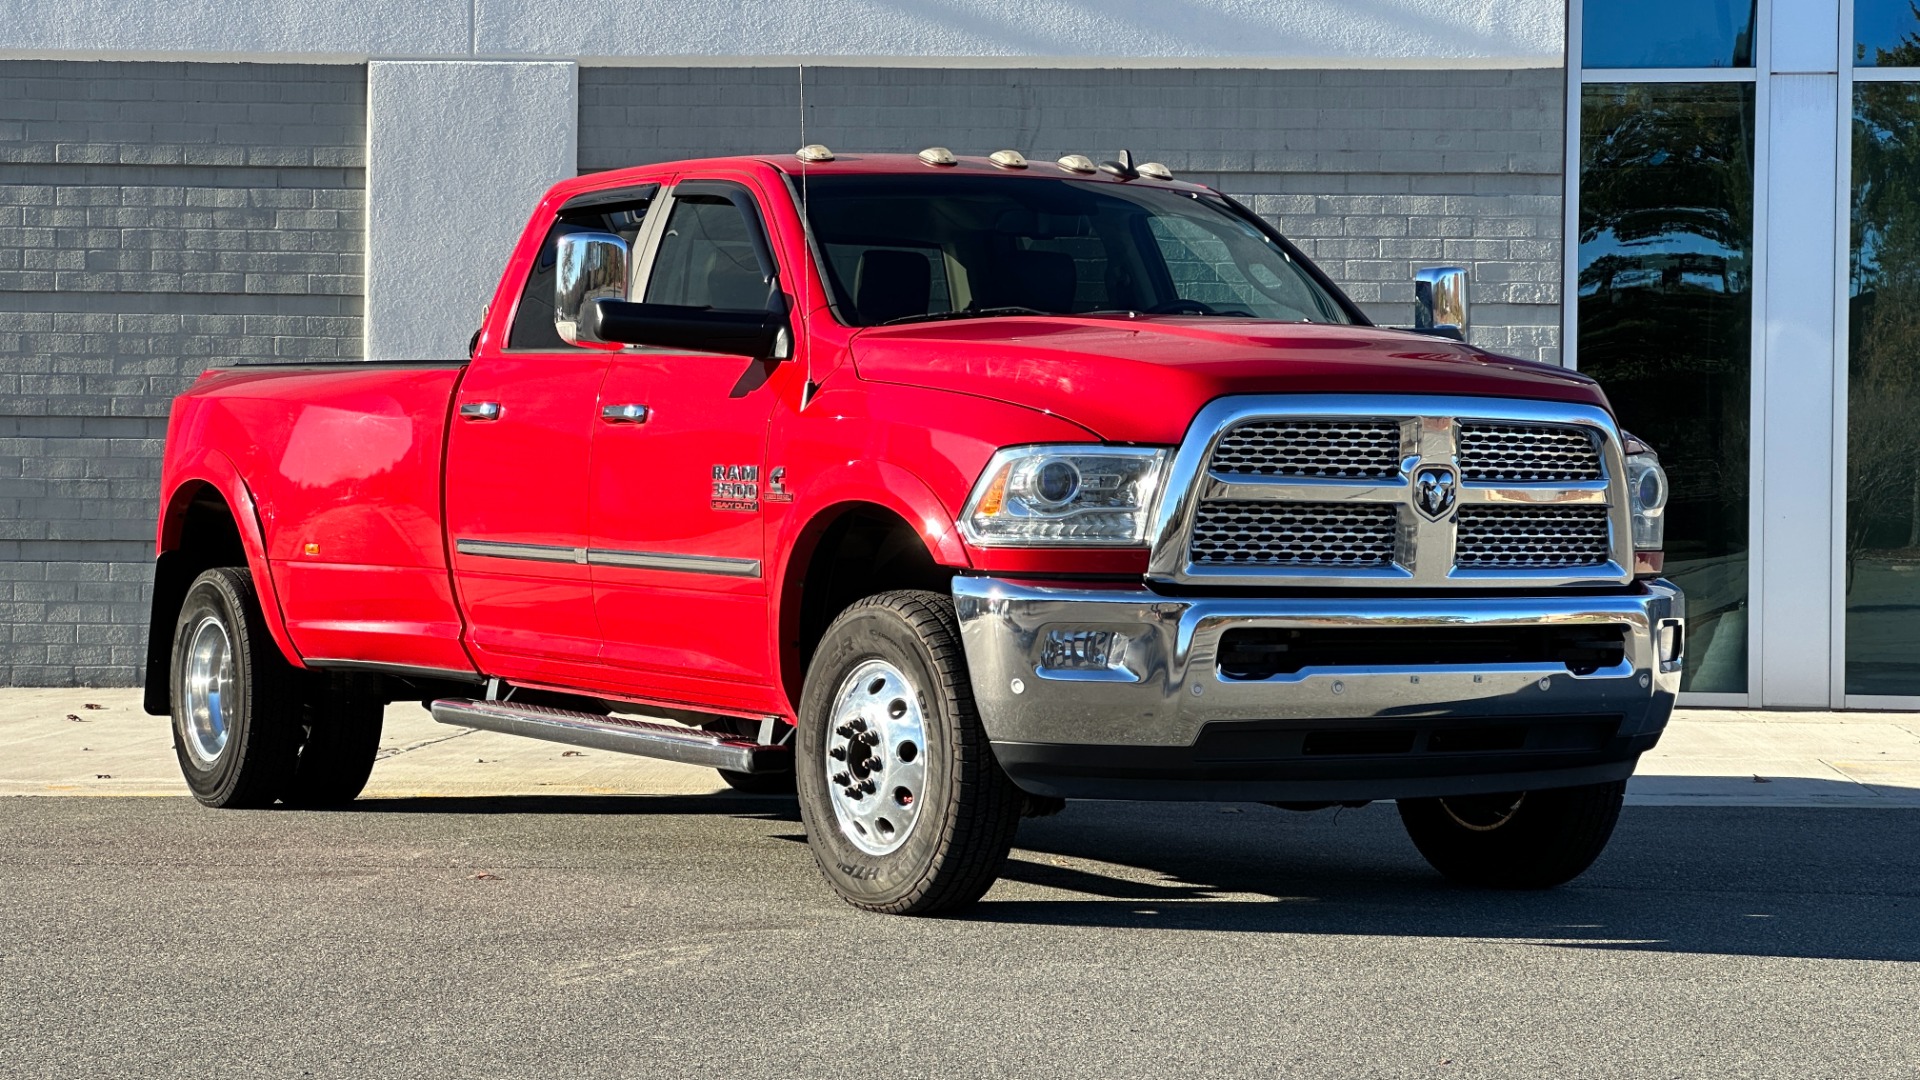 Used 2017 Ram 3500 LARAMIE / TURBO DIESEL / AISIN TRANSMISSION / DUAL REAR WHEELS / 4X4 / CREW for sale $45,995 at Formula Imports in Charlotte NC 28227 59